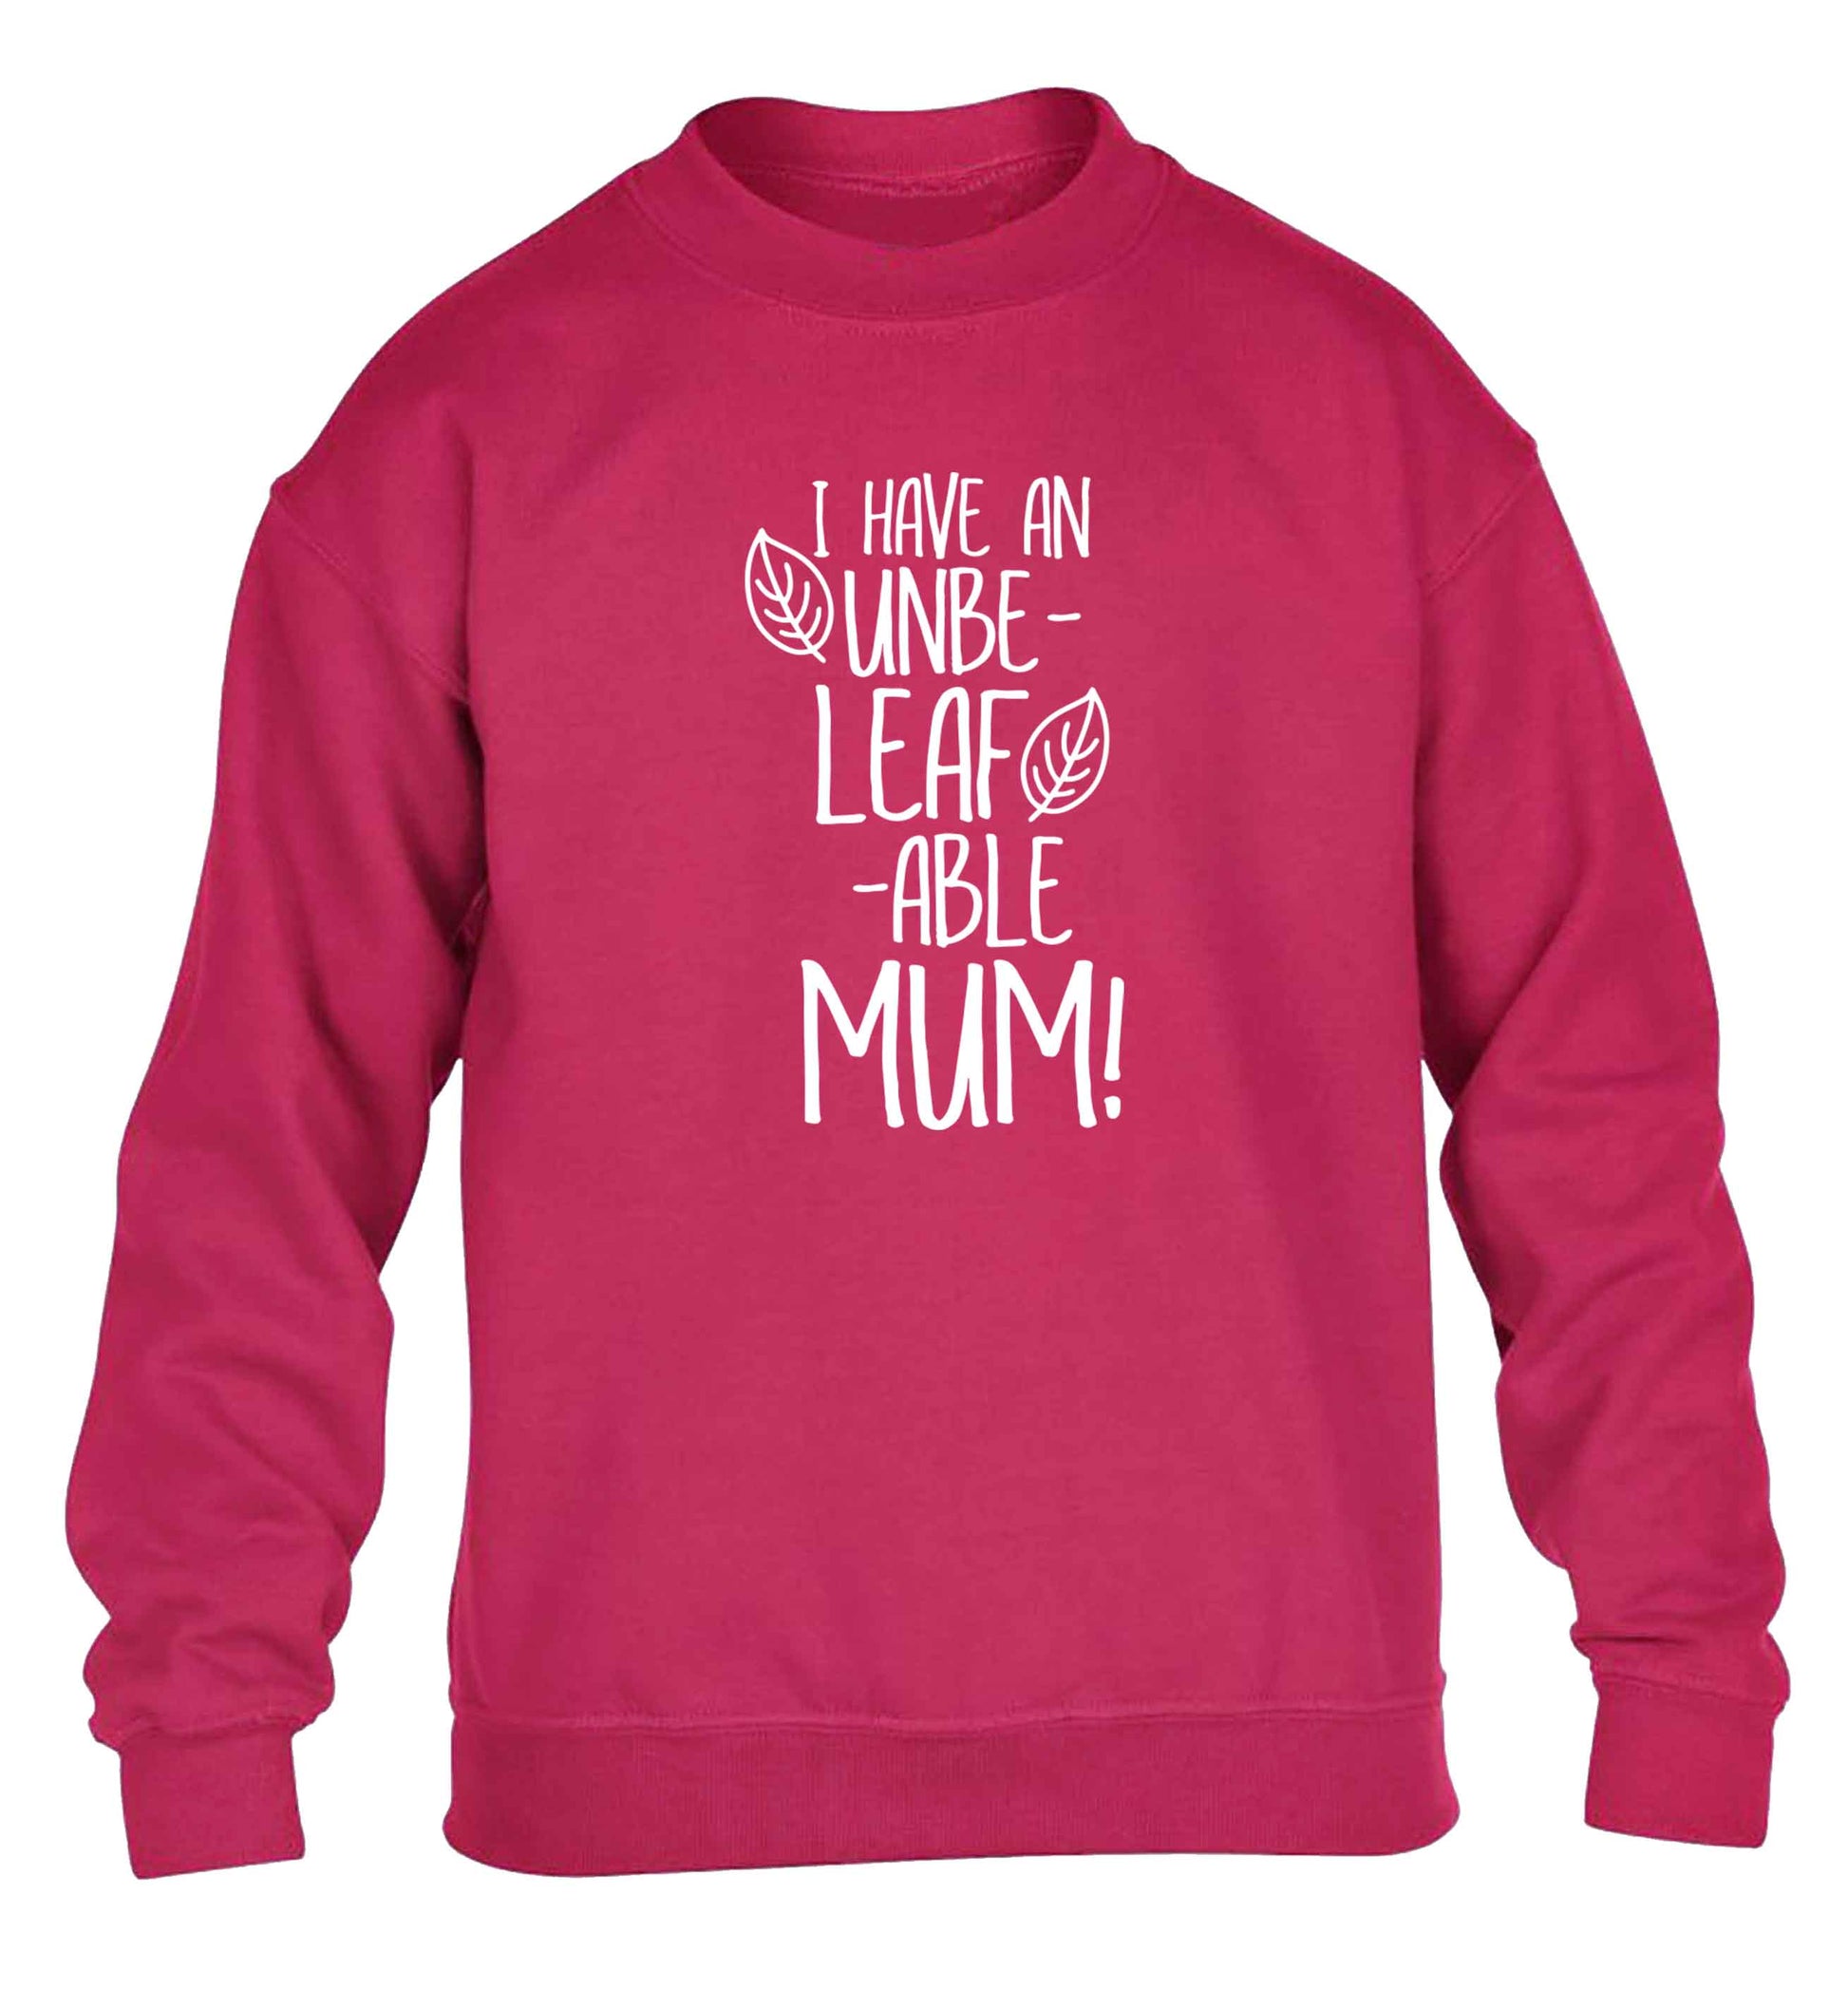 I have an unbeleafable mum! children's pink sweater 12-13 Years